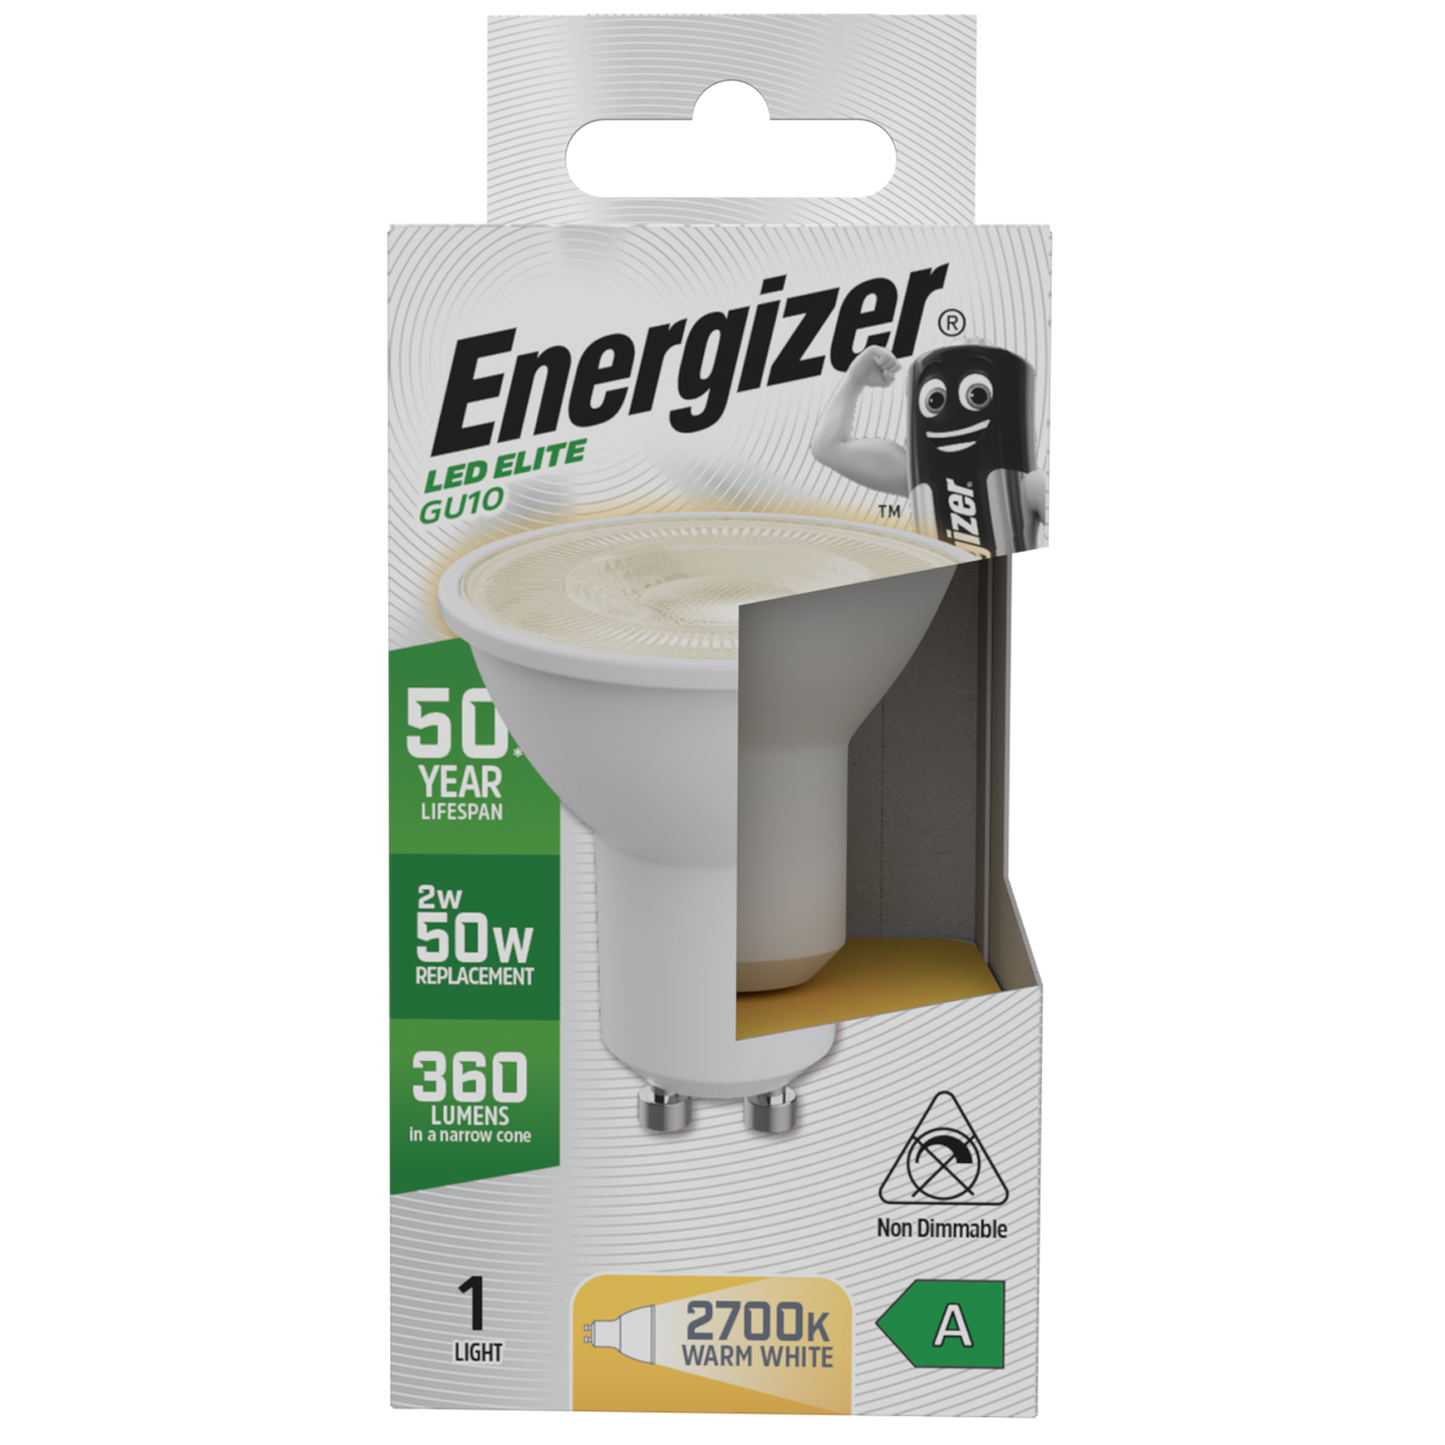 S29642 Energizer A Rated LED Elite GU10 360lm 2W 2700K (Warm White) - Box of 1